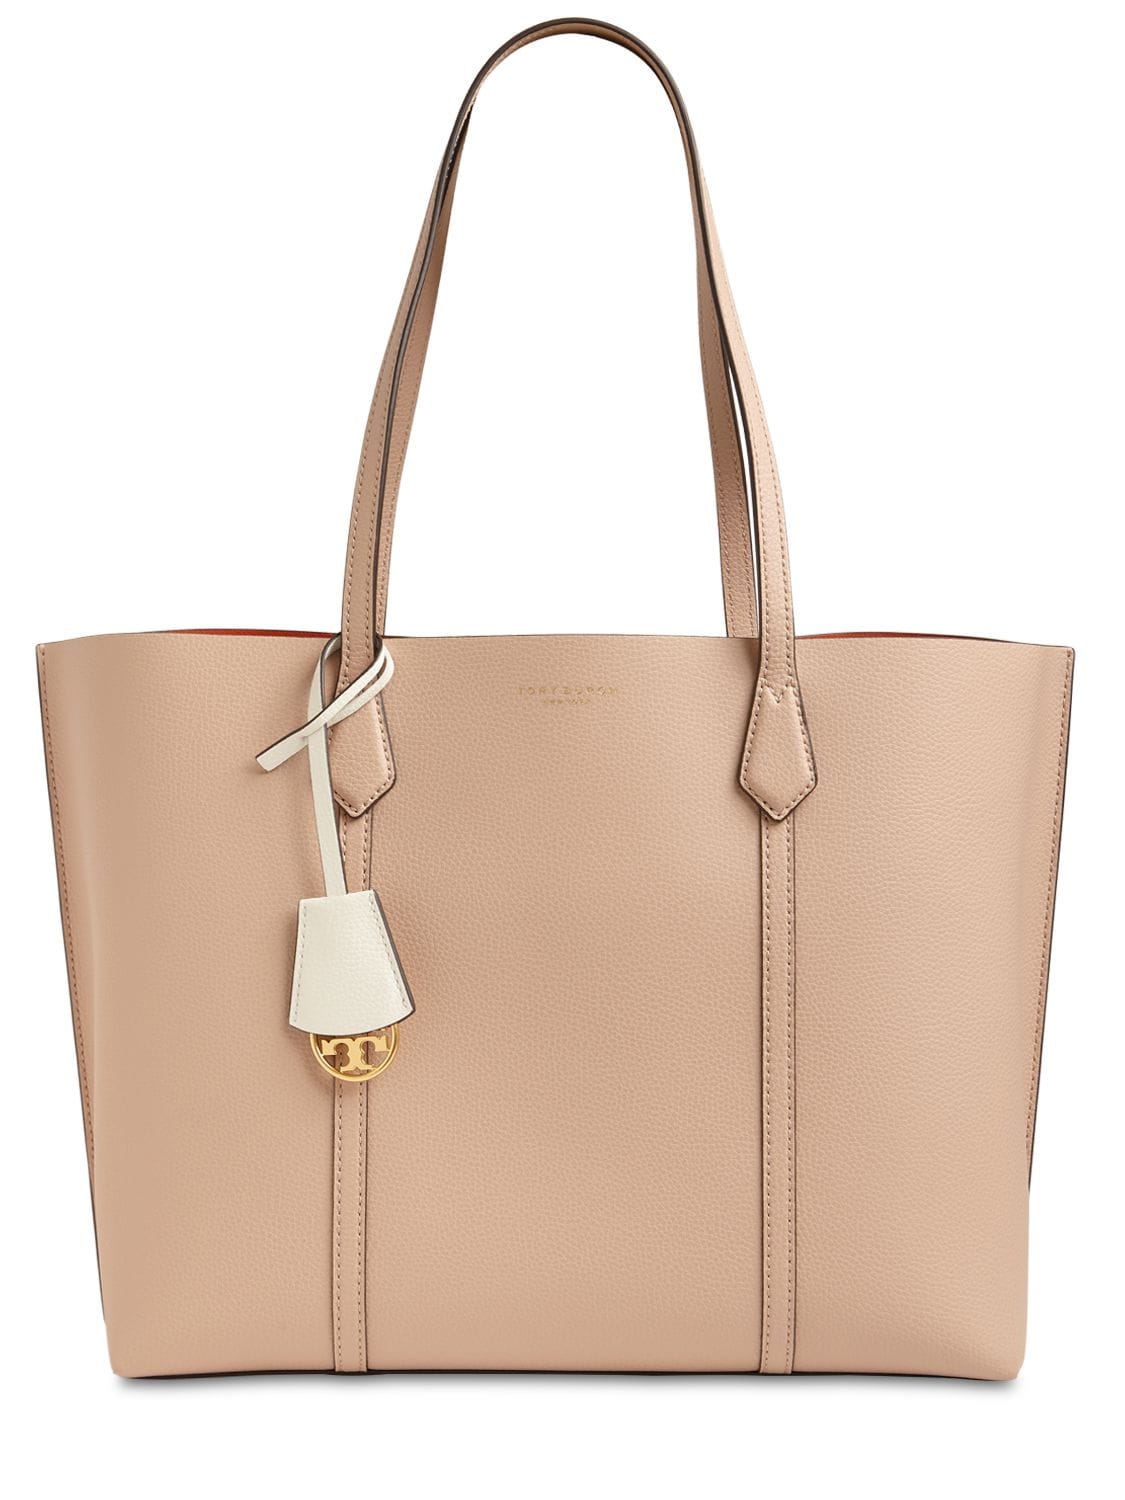 Tory Burch Perry Multicolor Leather Tote Bag In Devon Sand